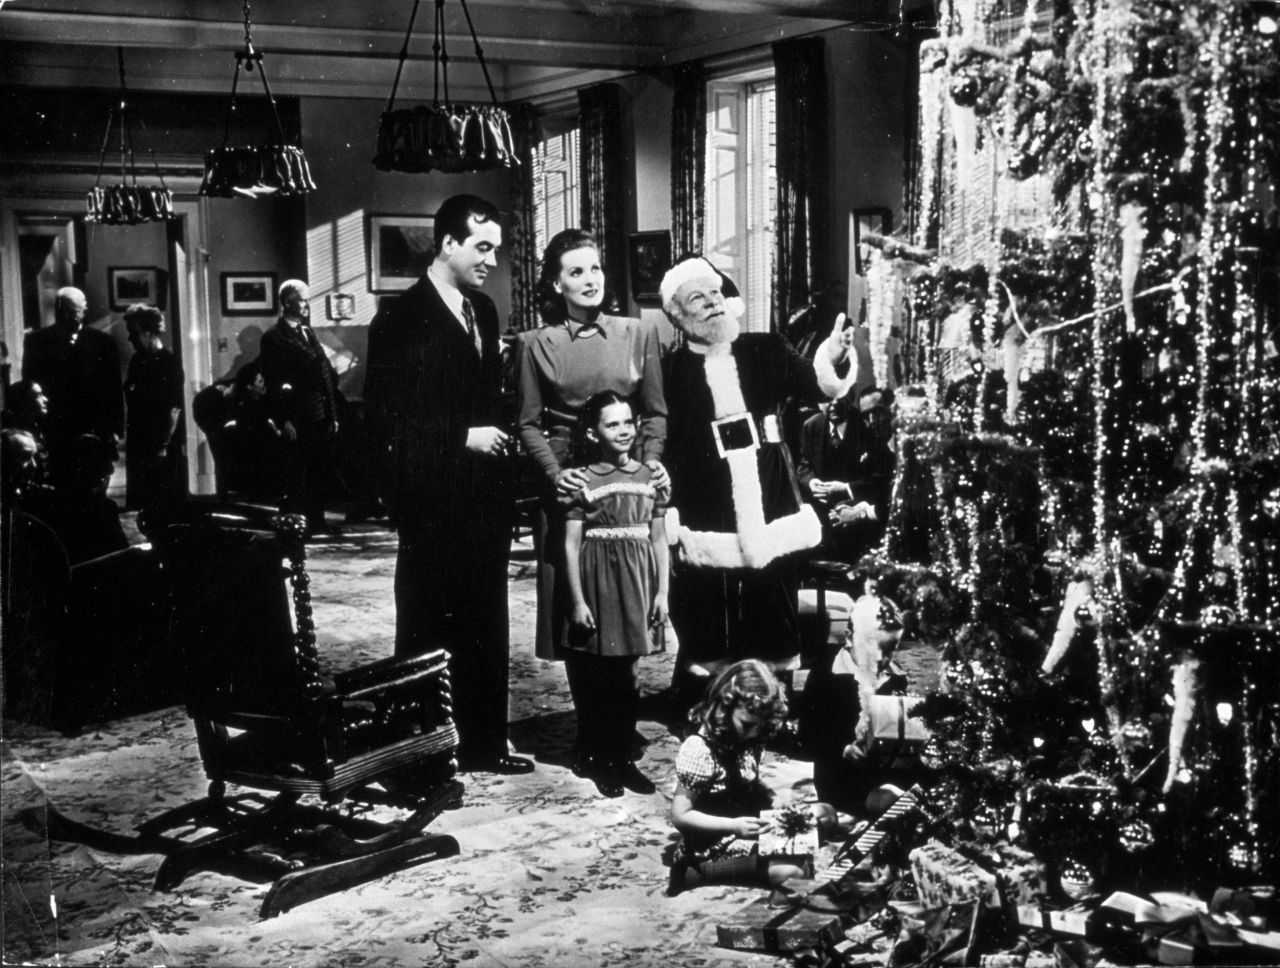 The original Miracle on 34th Street was released in 1947 and remade in 1994.